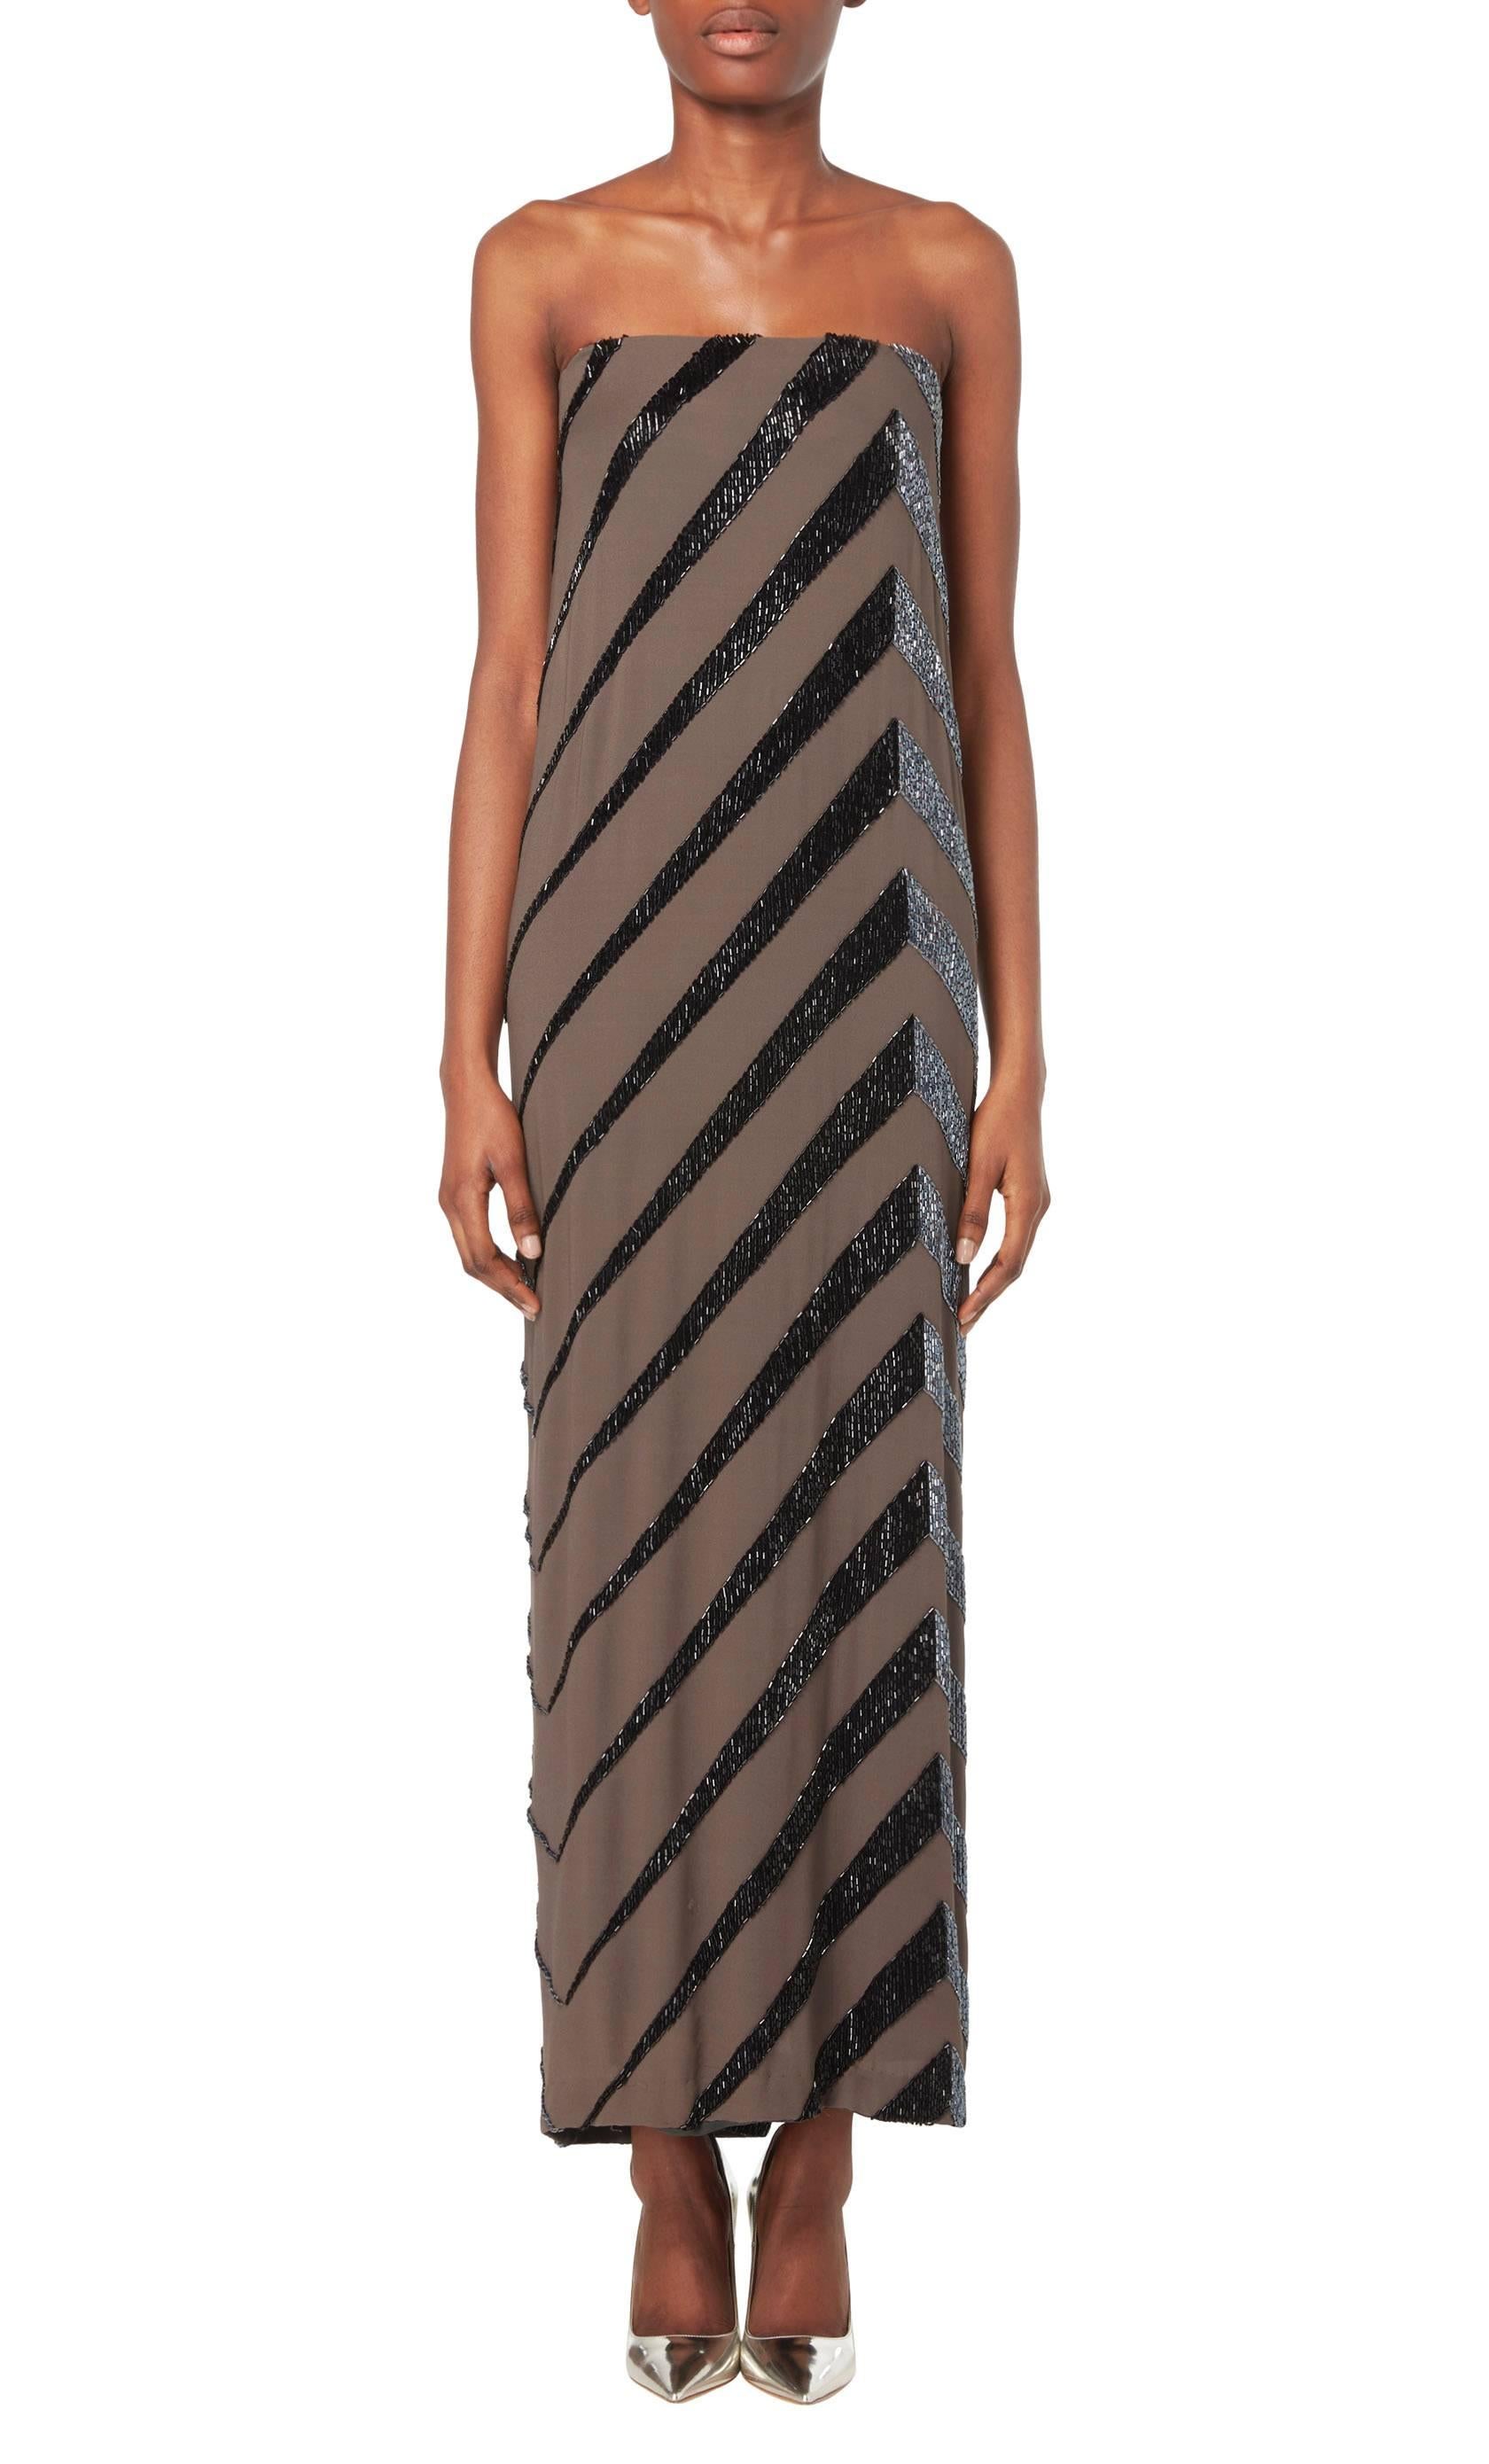 A striking dress by the legendary Bob Mackie, this strapless column dress in chocolate brown silk jersey is embellished with gunmetal grey bugle beads. Slinky, chic and perfect for injecting glamour into a wardrobe.

Constructed in brown silk